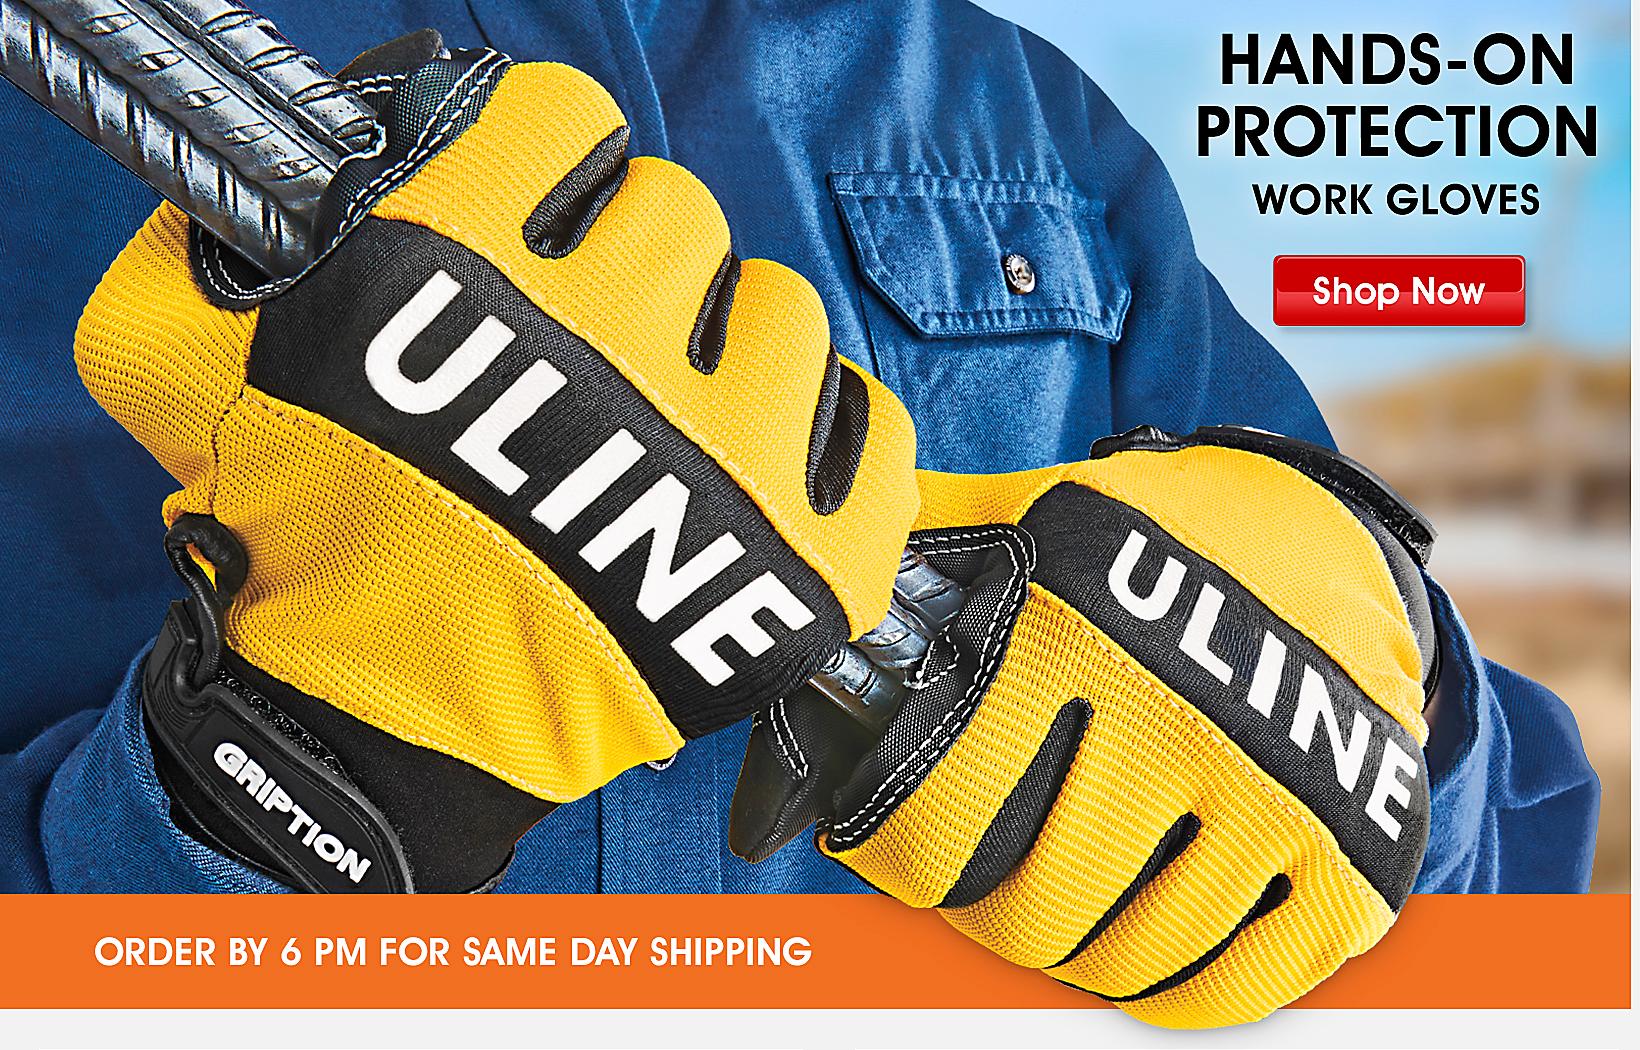 Hands-On Protection - Work Gloves - Shop Now – ORDER BY 6 PM FOR SAME DAY SHIPPING